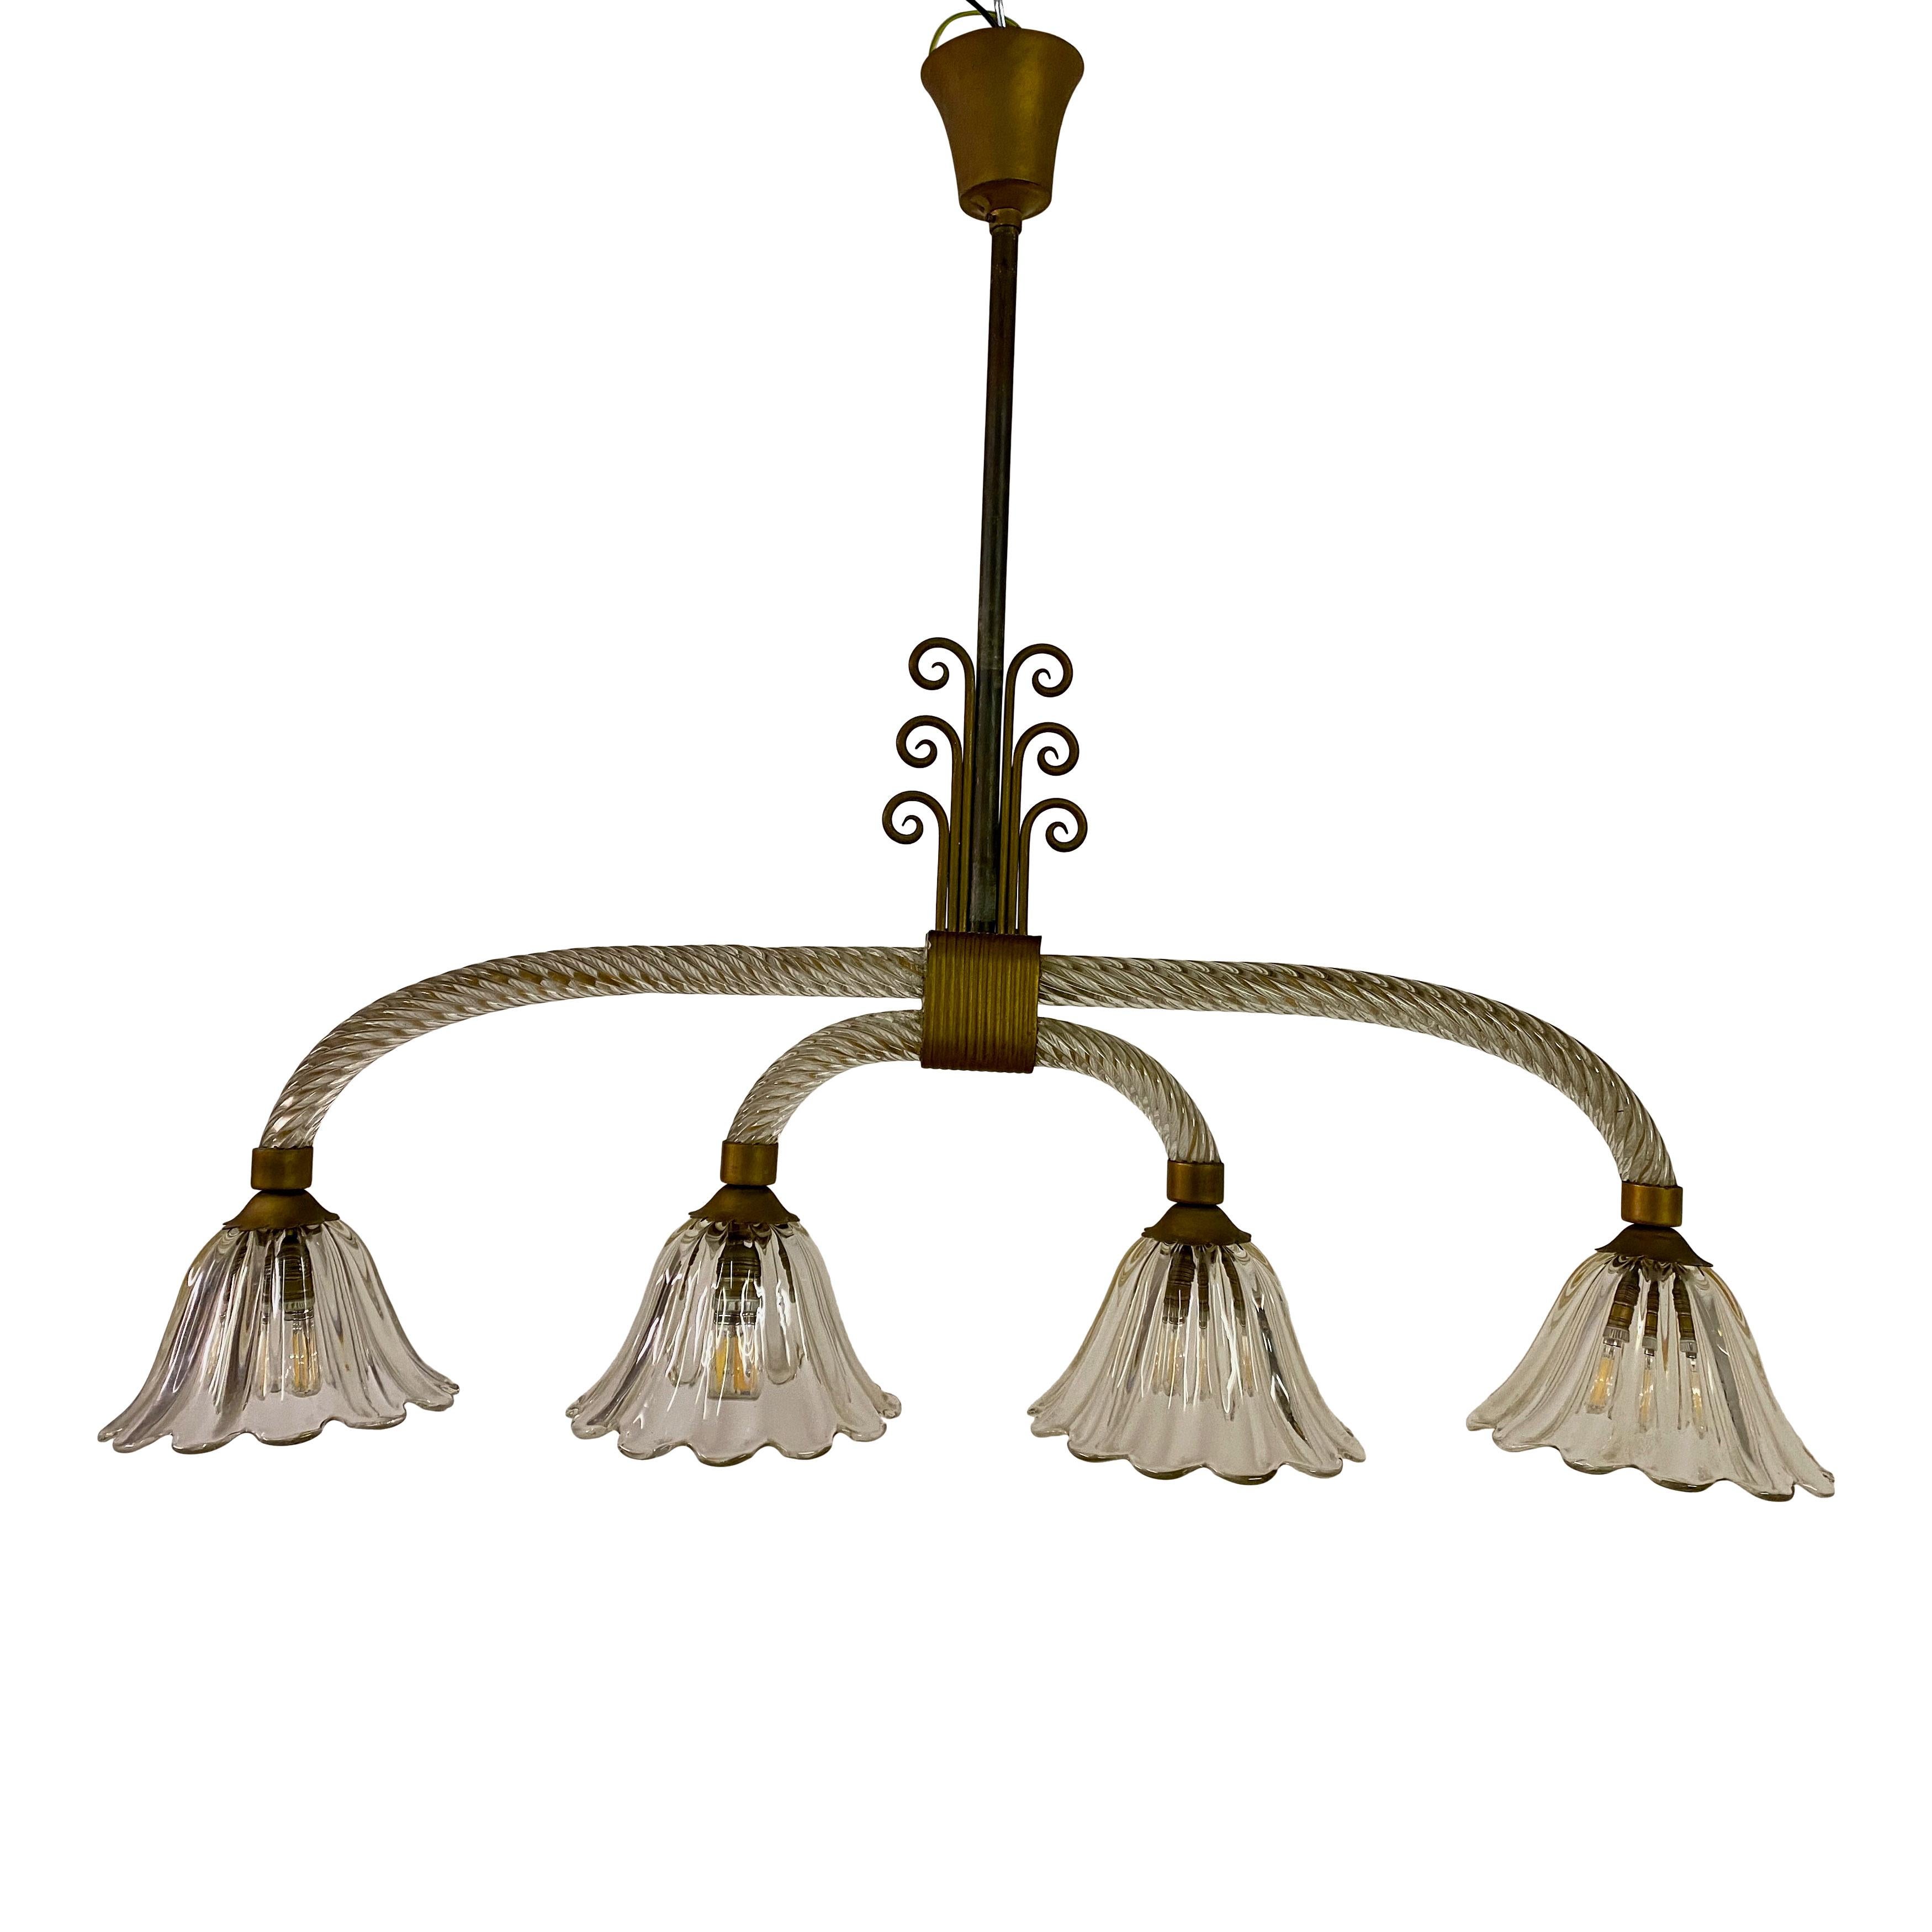 Chandelier

Murano glass

Attributed to Barovier and Toso

Twisted glass stems

Brass scroll and fixtures

Rewired

Italy 1940s/1950s